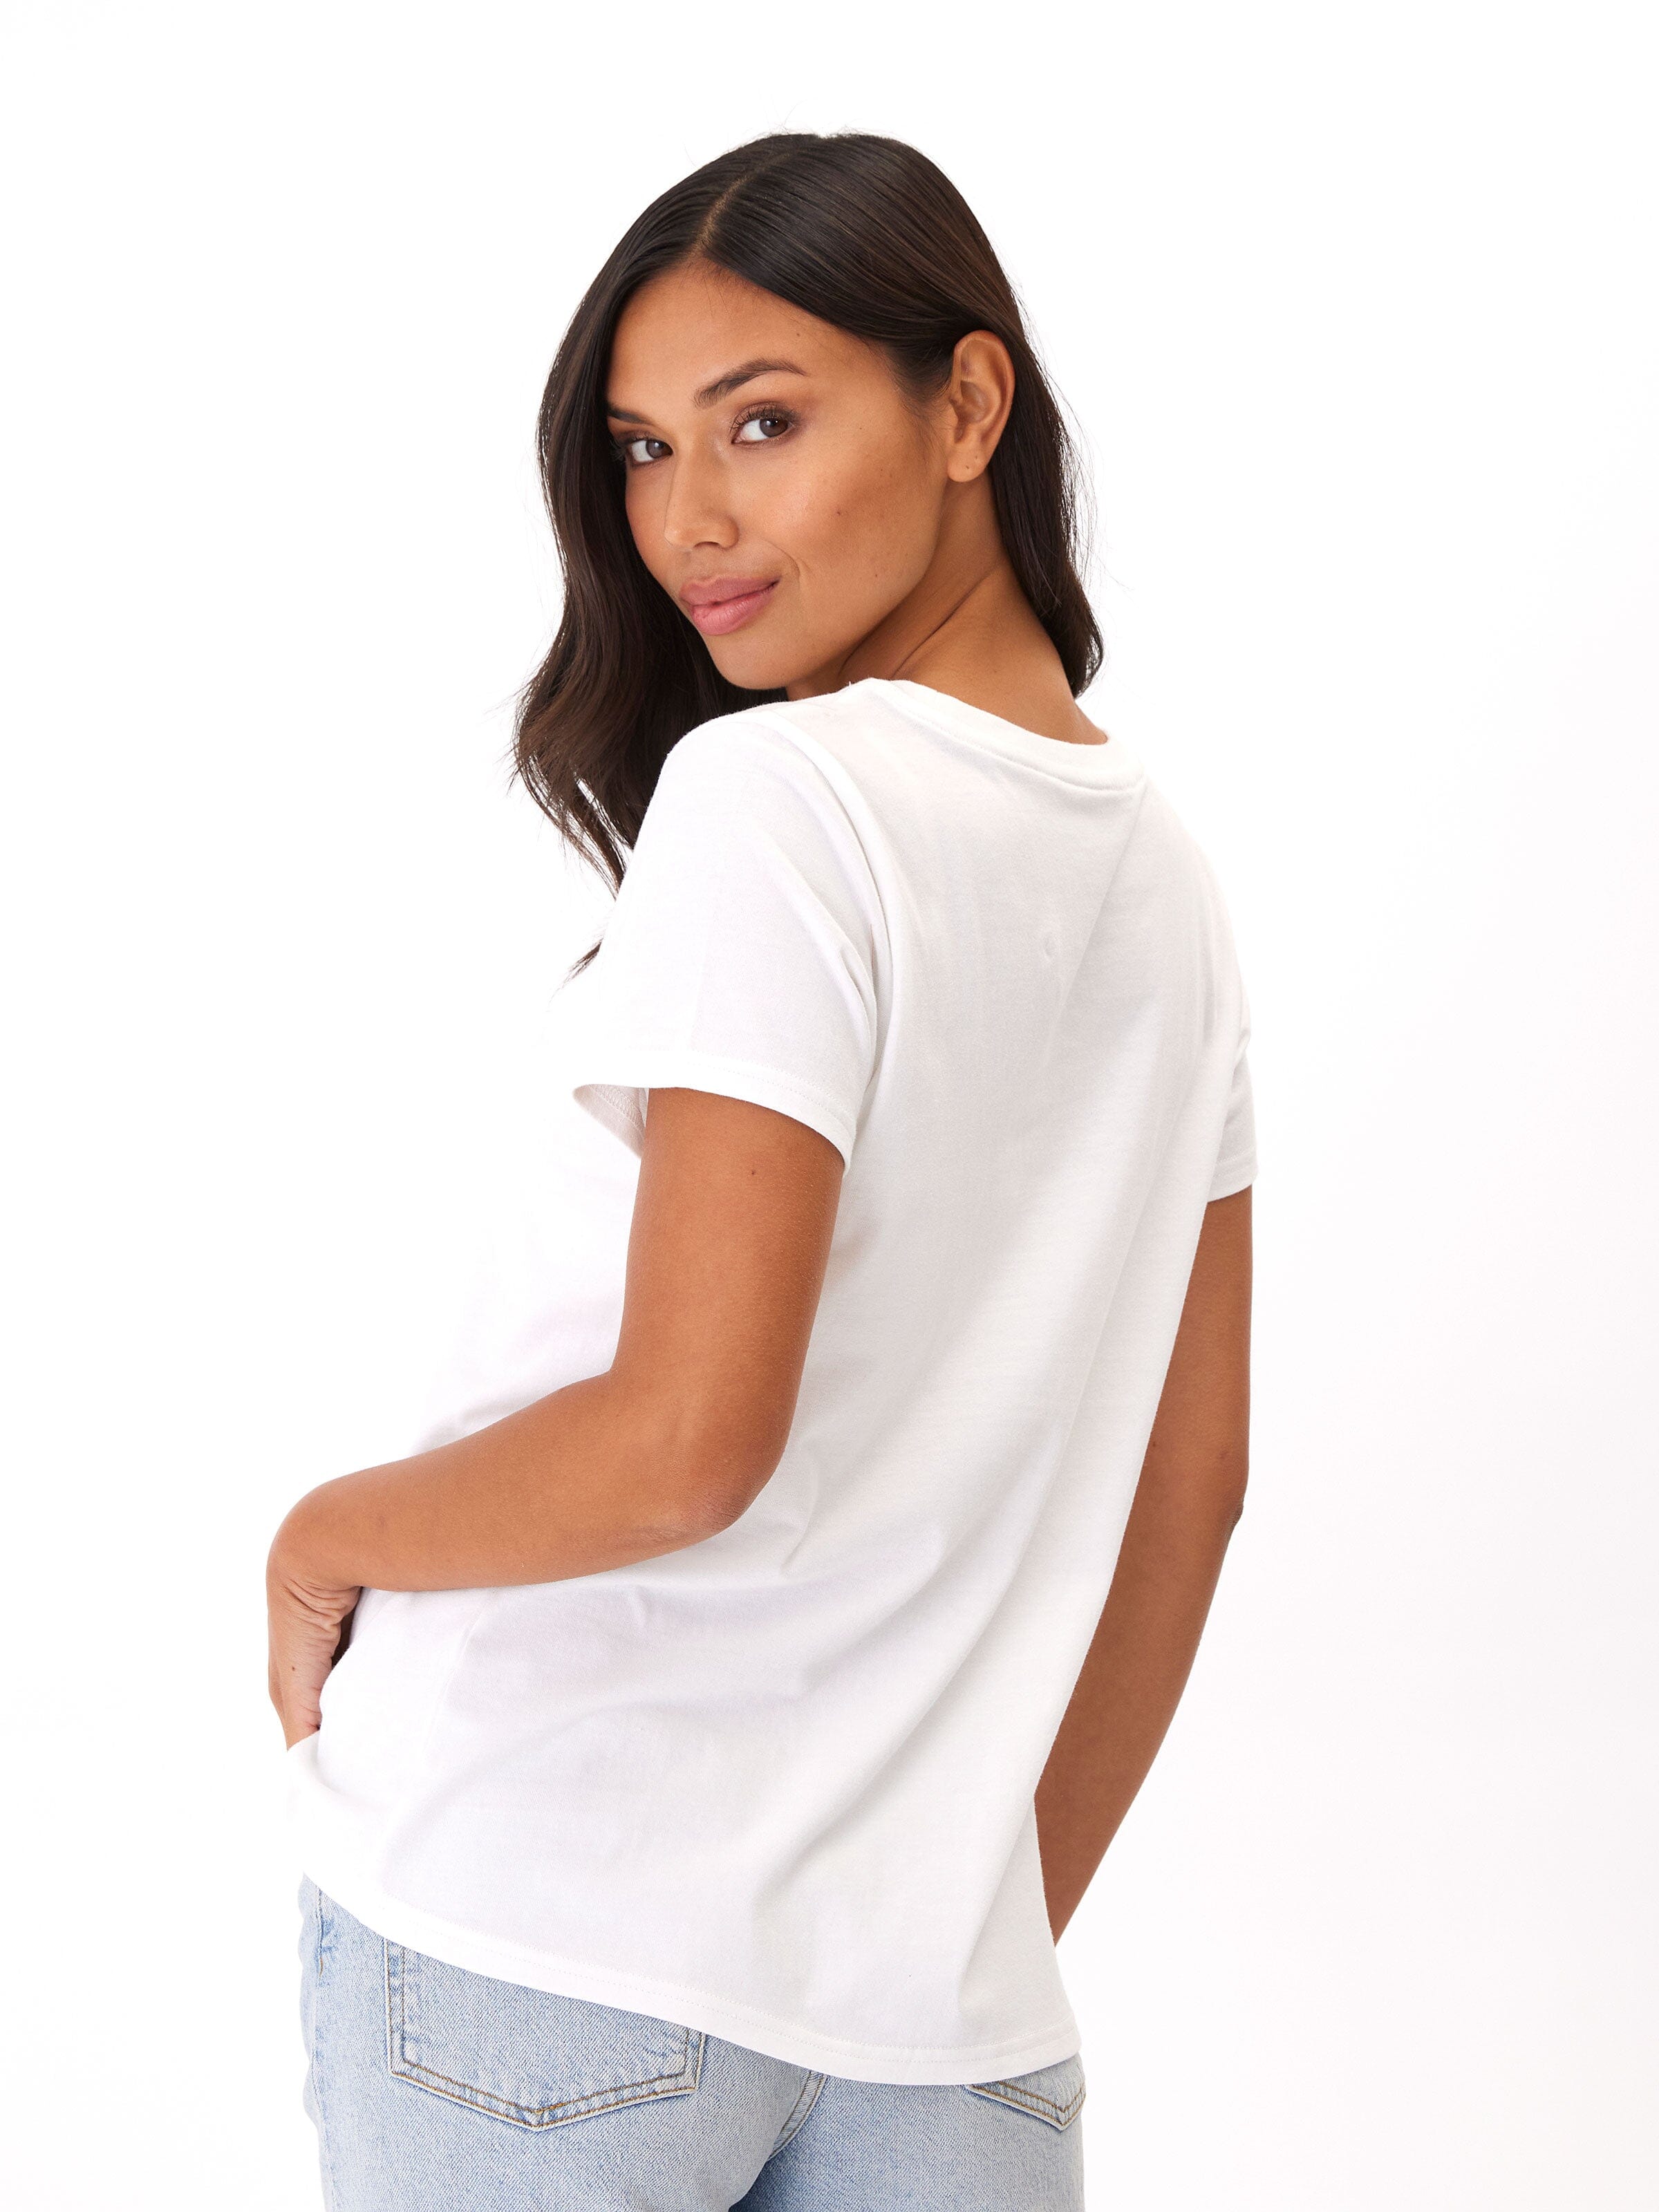 Odette Classic Jersey Crew Tee Womens Tops Short Threads 4 Thought 